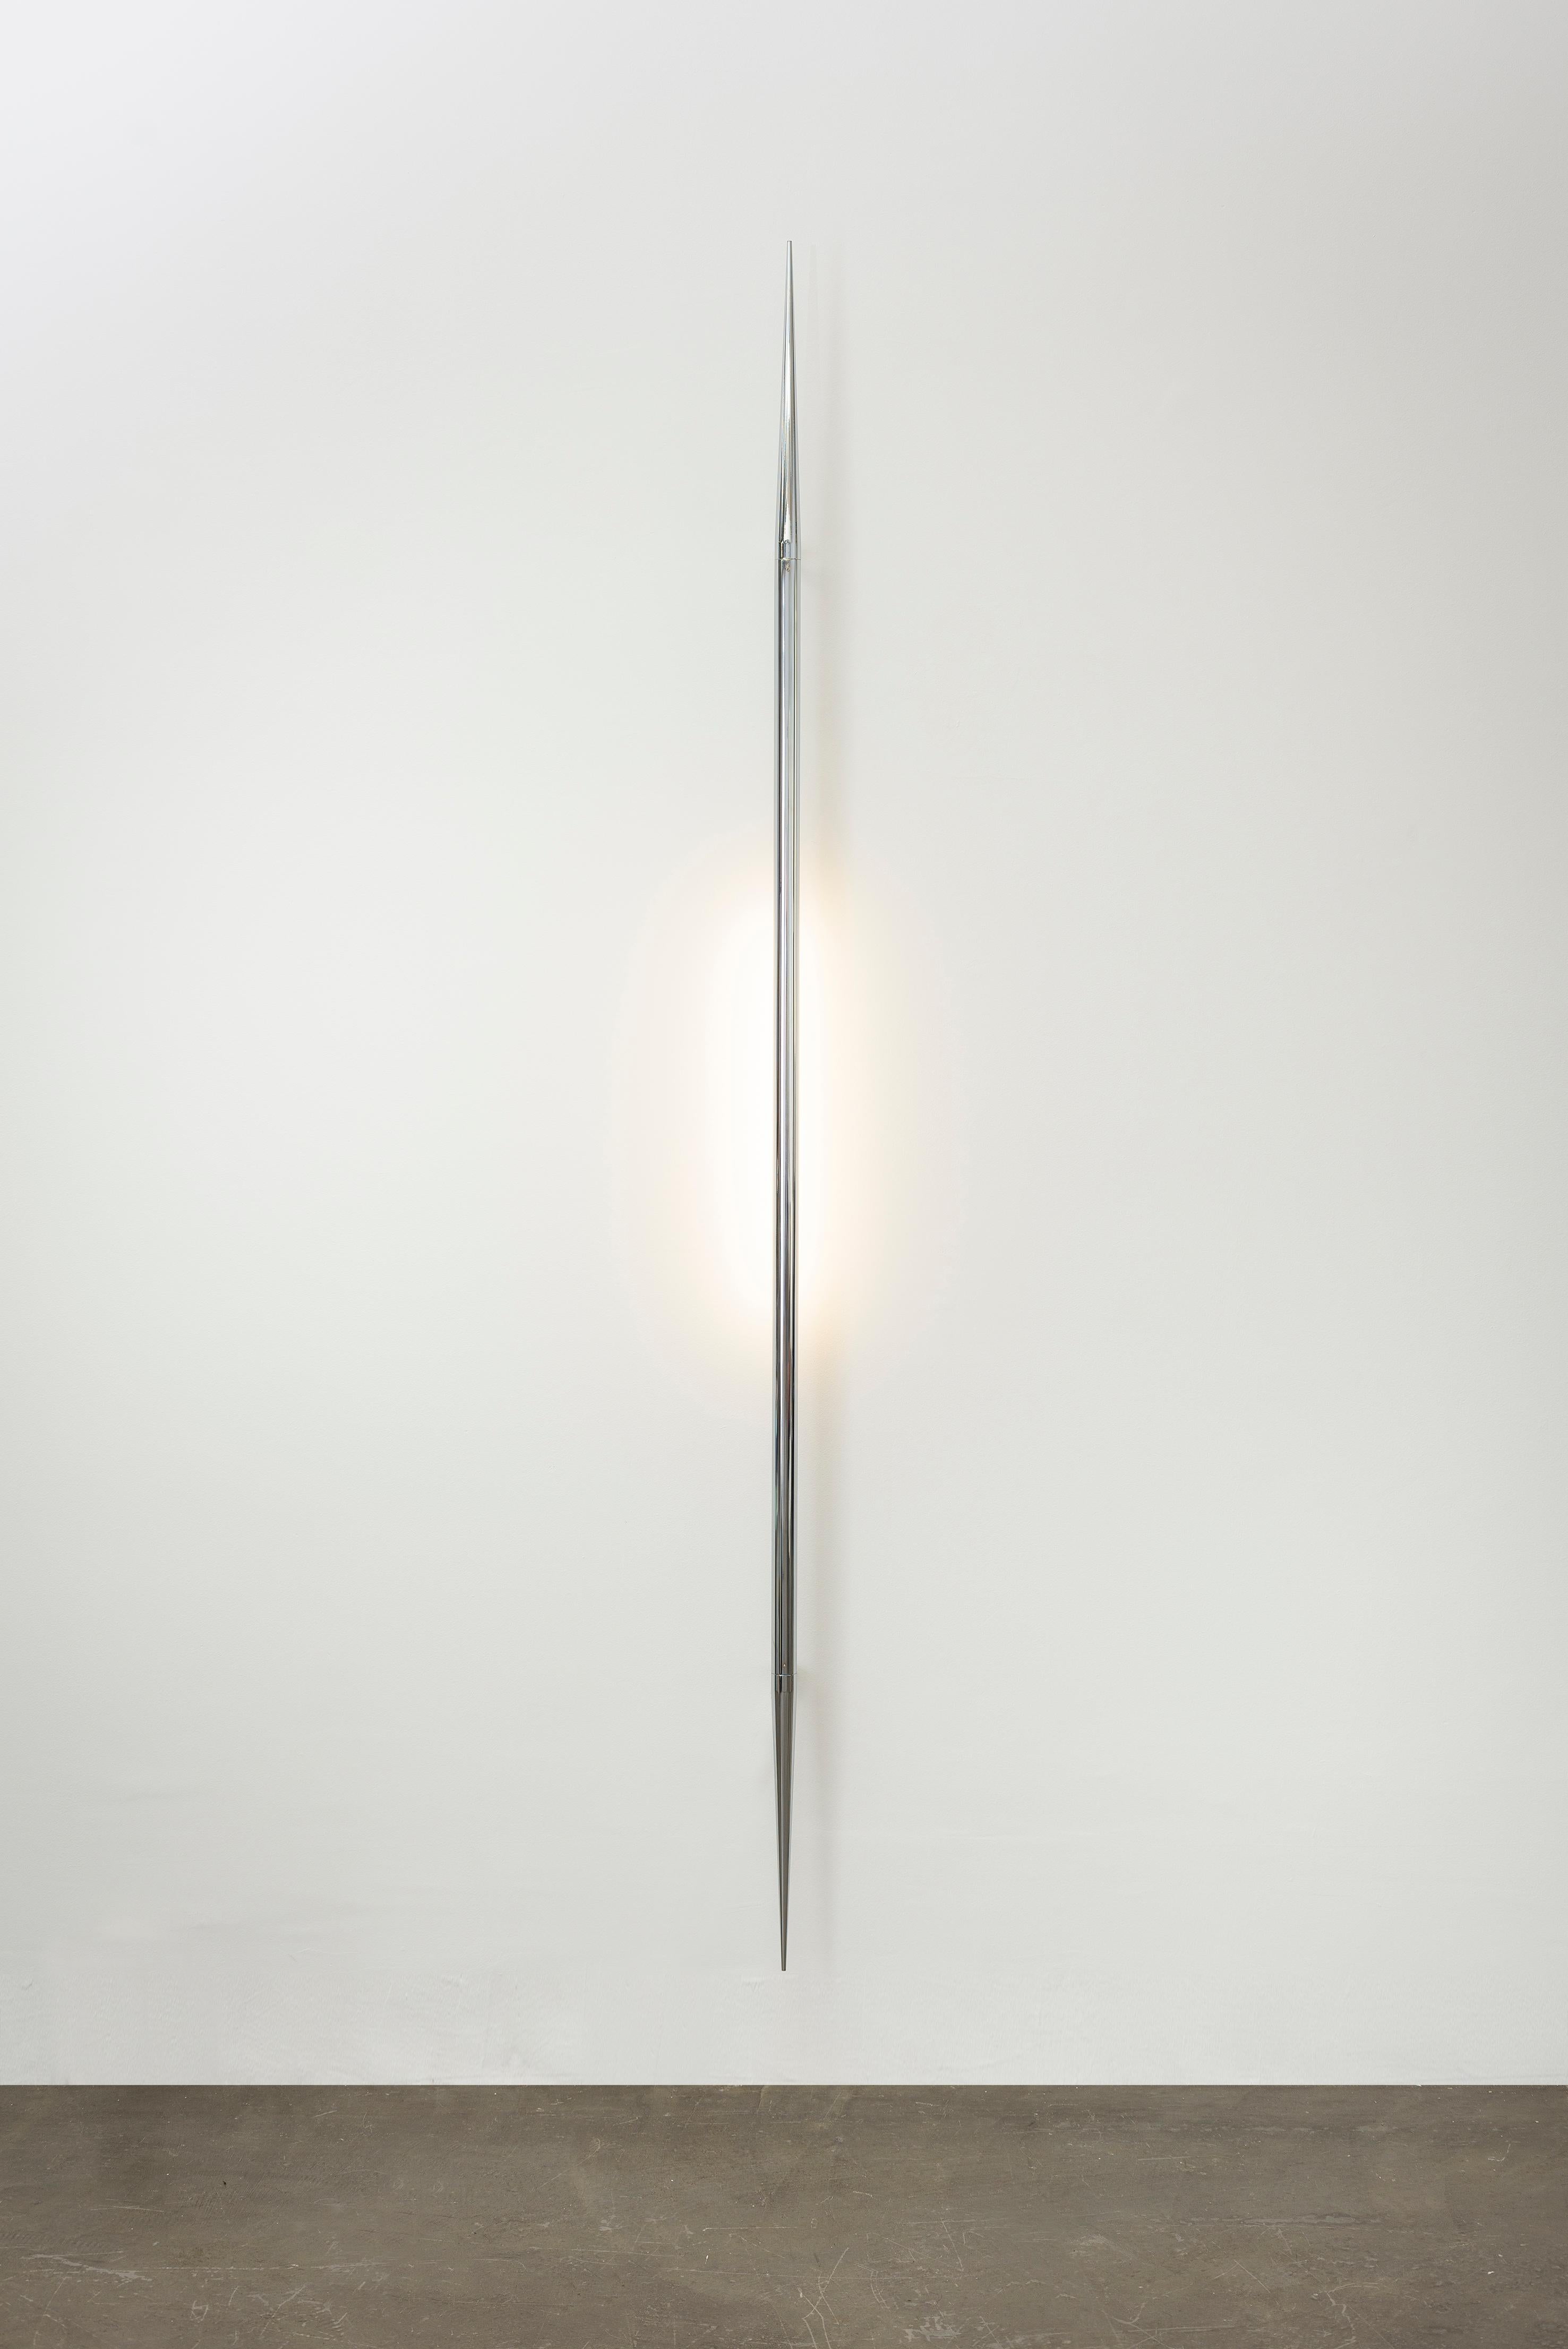 The Ferrão lamps are composed of a metallic body with a reduced diameter and sharp tips, referring to the image of a sting. The spike-shaped ends give the pieces tension, but also serenity, as it turns it into a line that disappears smoothly in the